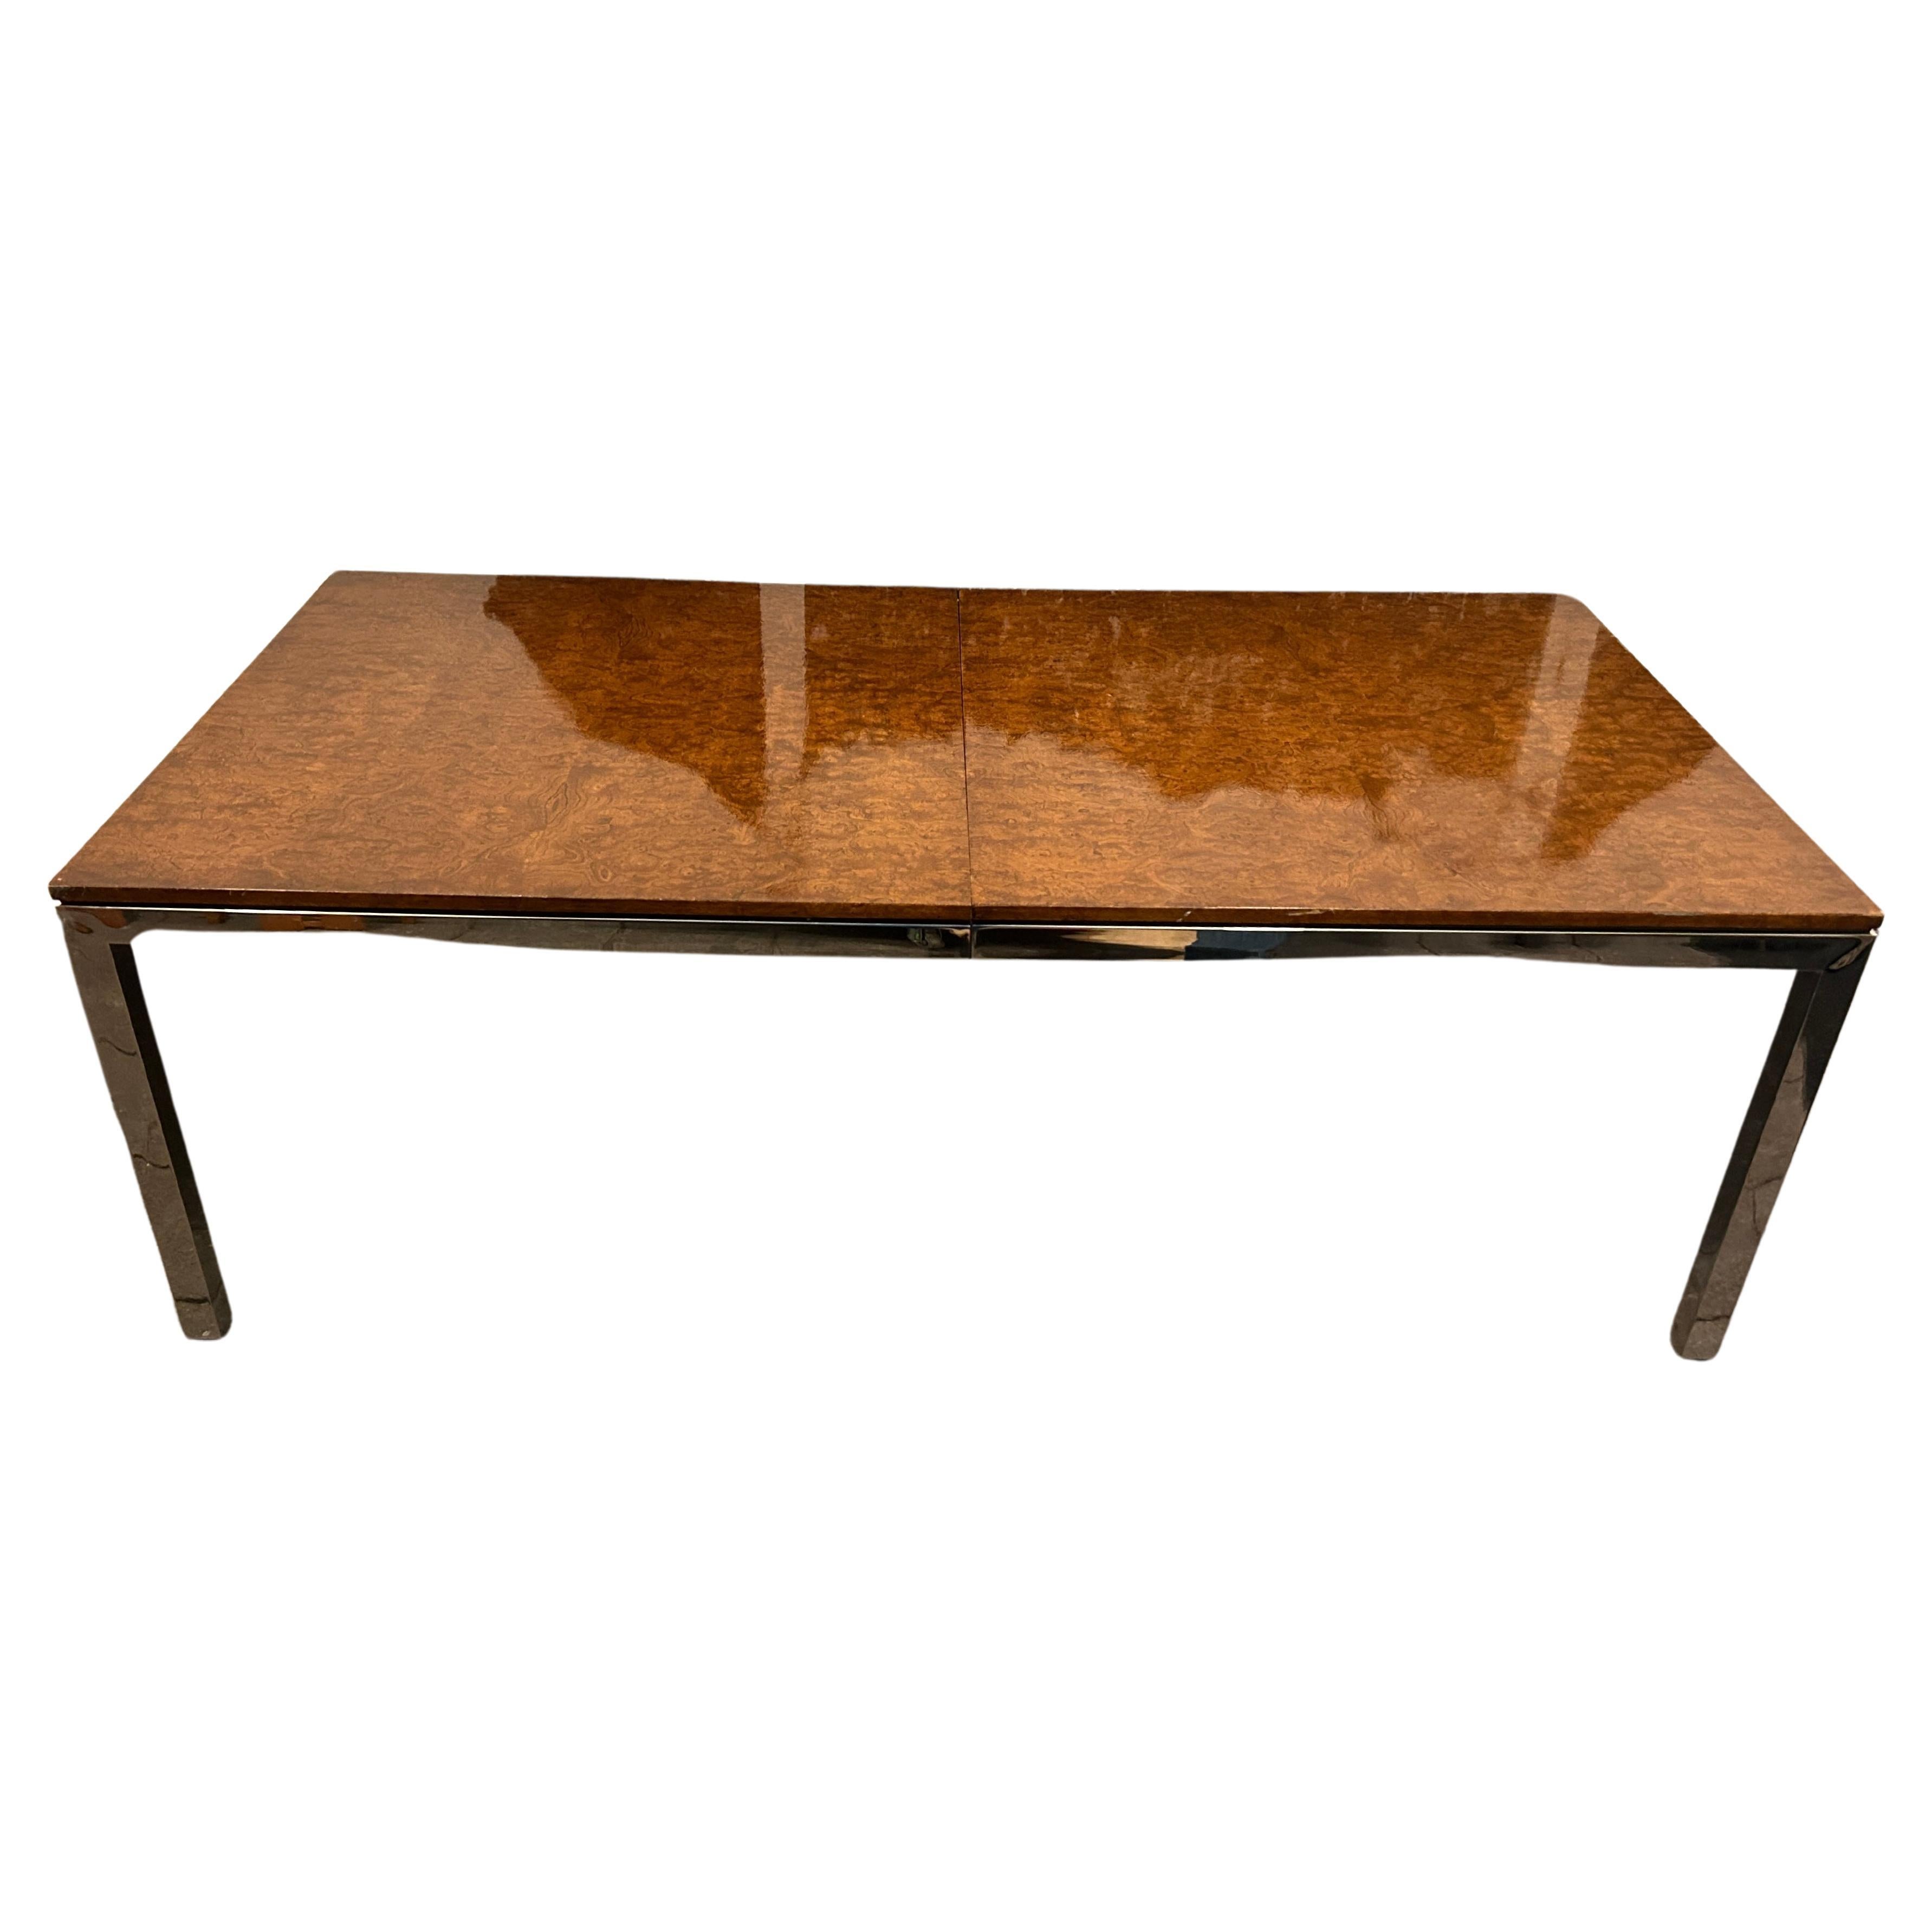 Stunning mid century chrome dining table with burl top 2 leaves  For Sale